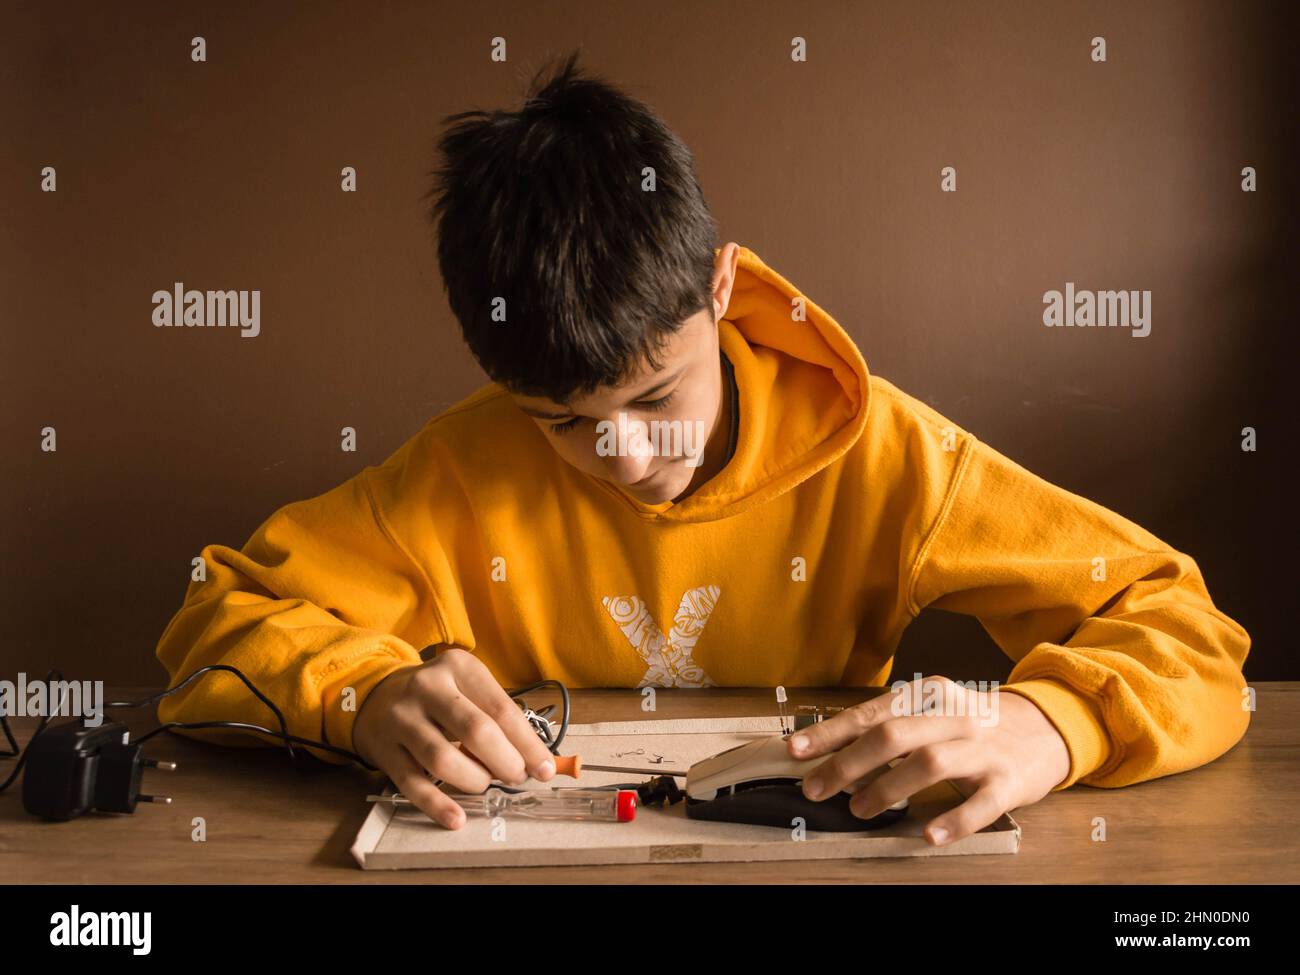 A teenage boy with brown hair is wearing a yellow hoodie. He is repairing things with tools. Stock Photo